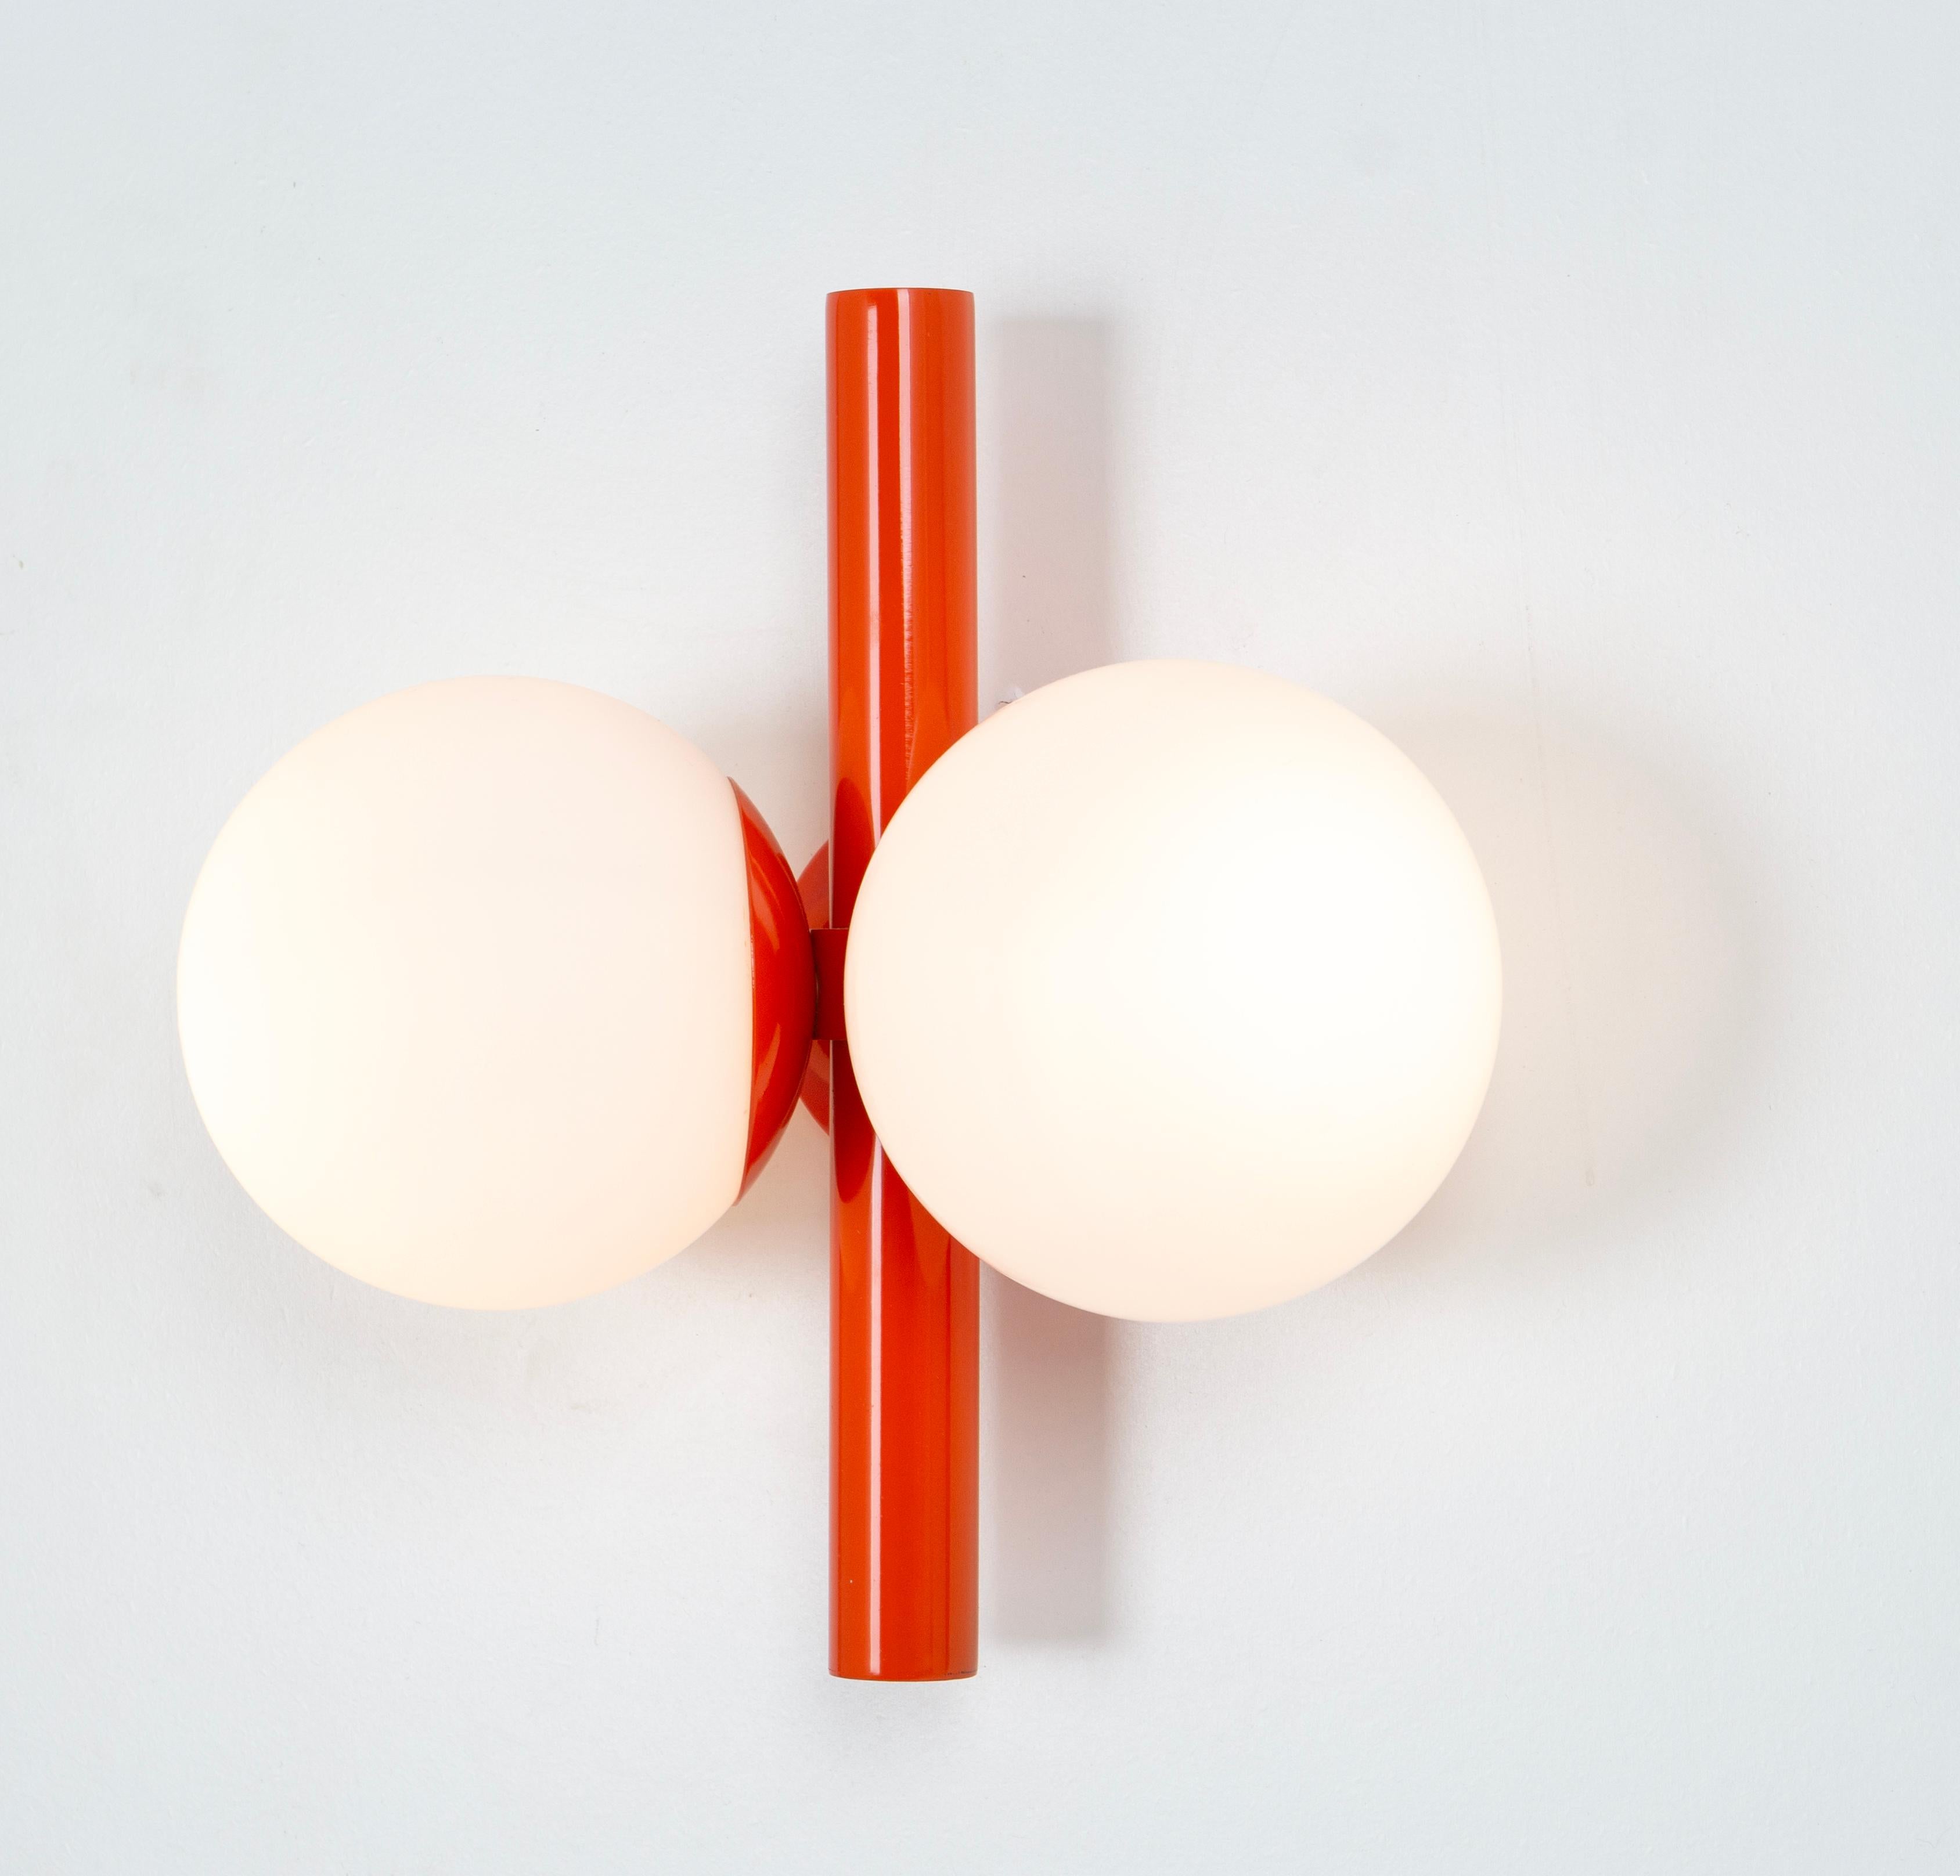 1 of 3 Midcentury Orbital Wall lights in Orange by Kaiser, Germany, 1970s For Sale 4